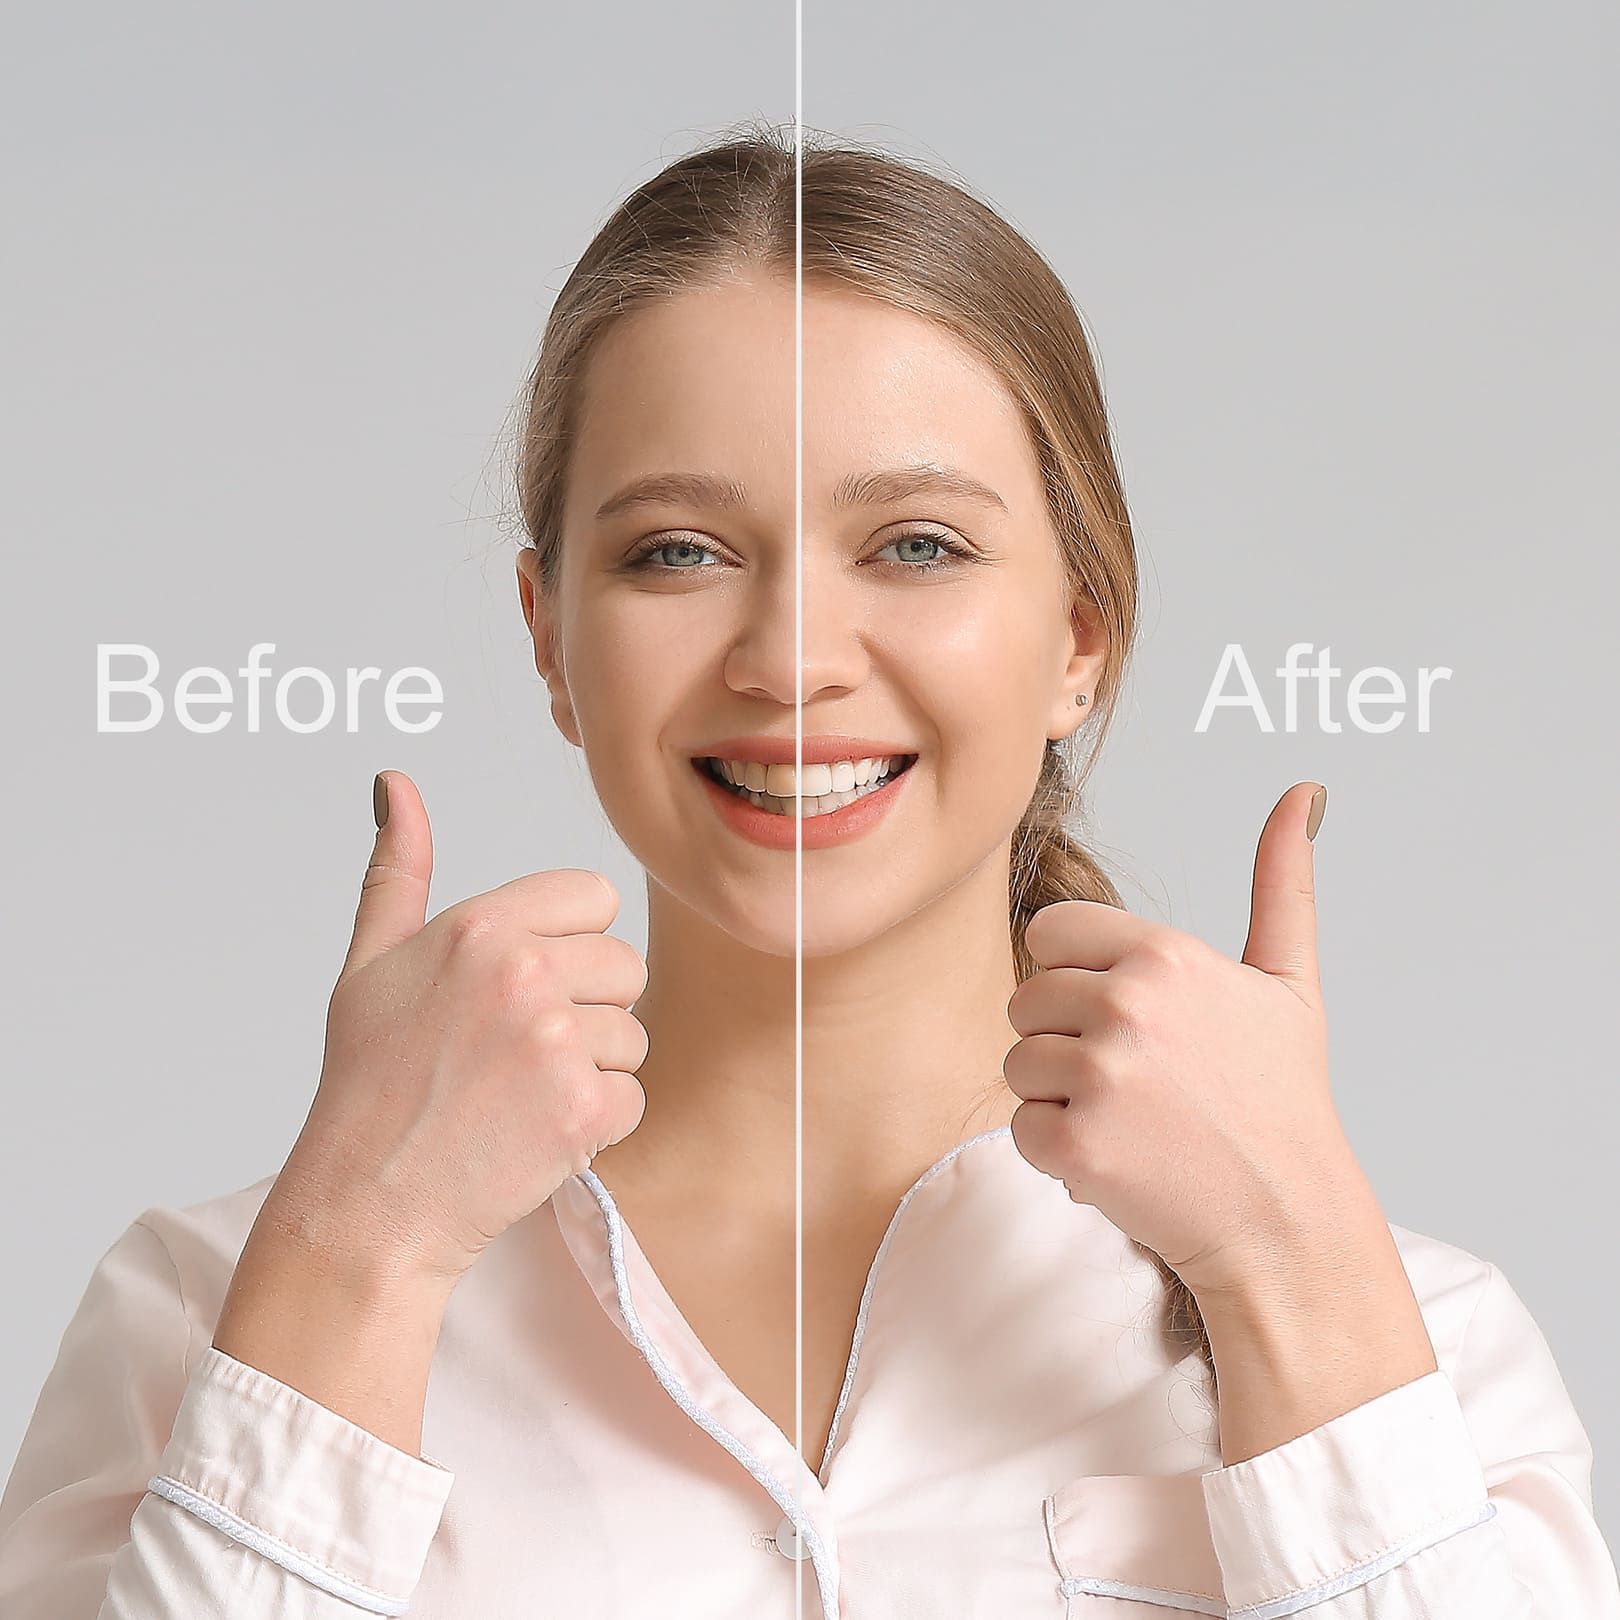 Before and after teeth whitening Prosper TX 75078